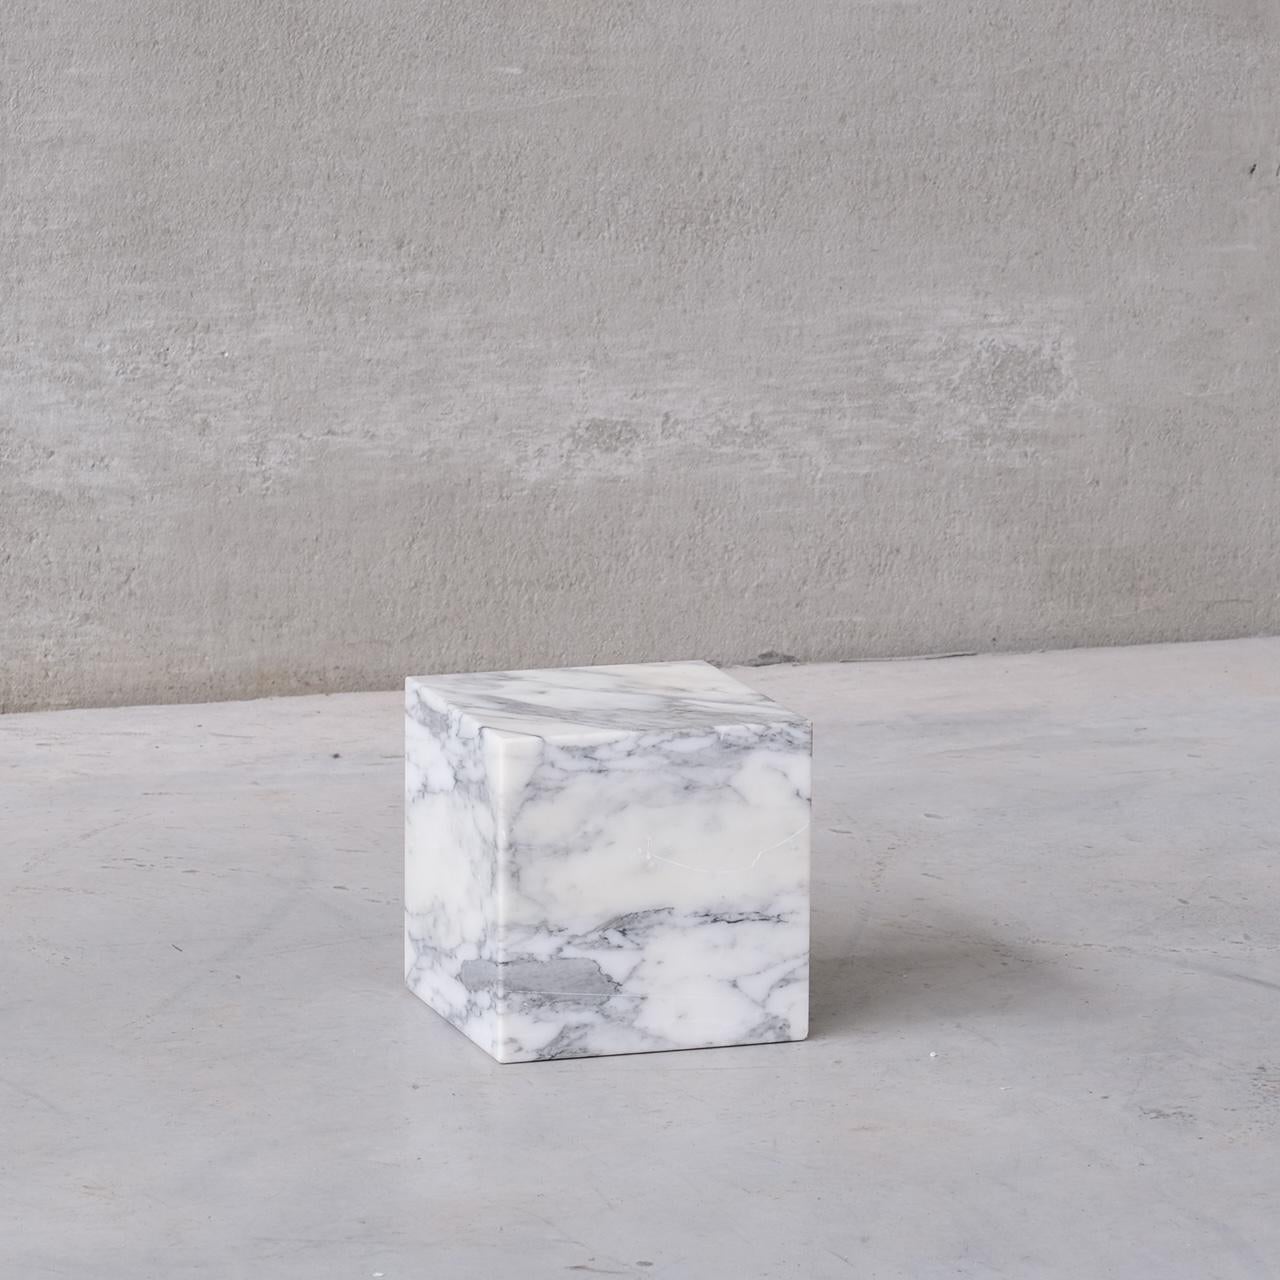 A large marble square objet. 

Belgium, circa 1970s. 

Good vintage condition. 

Heavy in weight as it is solid. 

Location: Belgium Gallery.

Dimensions: 24 H x 24 W x 24 D in cm. 

Delivery: POA

We can ship around the world. Can be